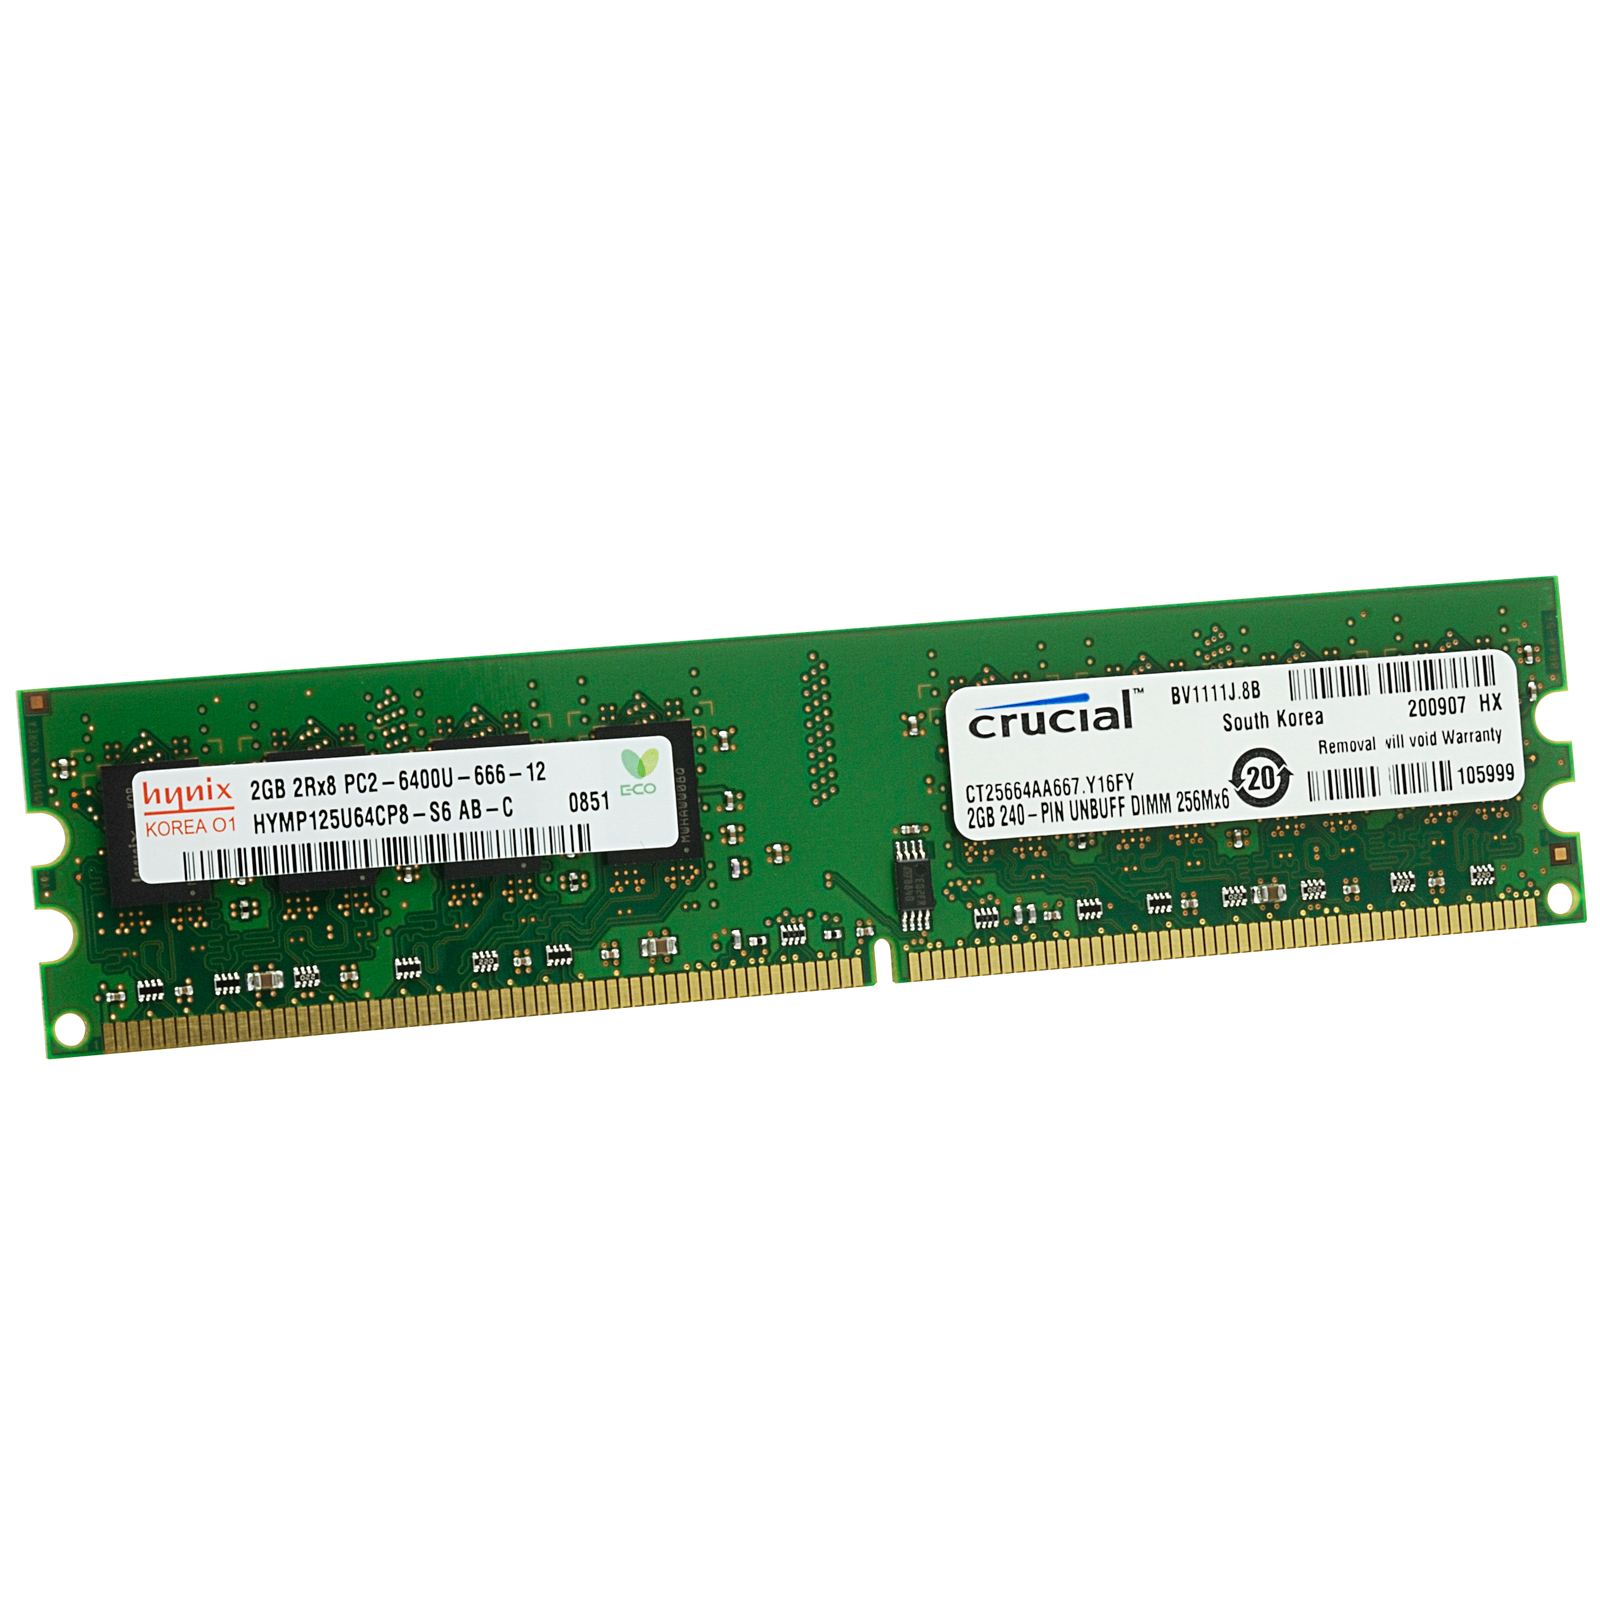 2GB DDR2-667 RAM Memory Upgrade for The ASUS P5 Series P5KR PC2-5300